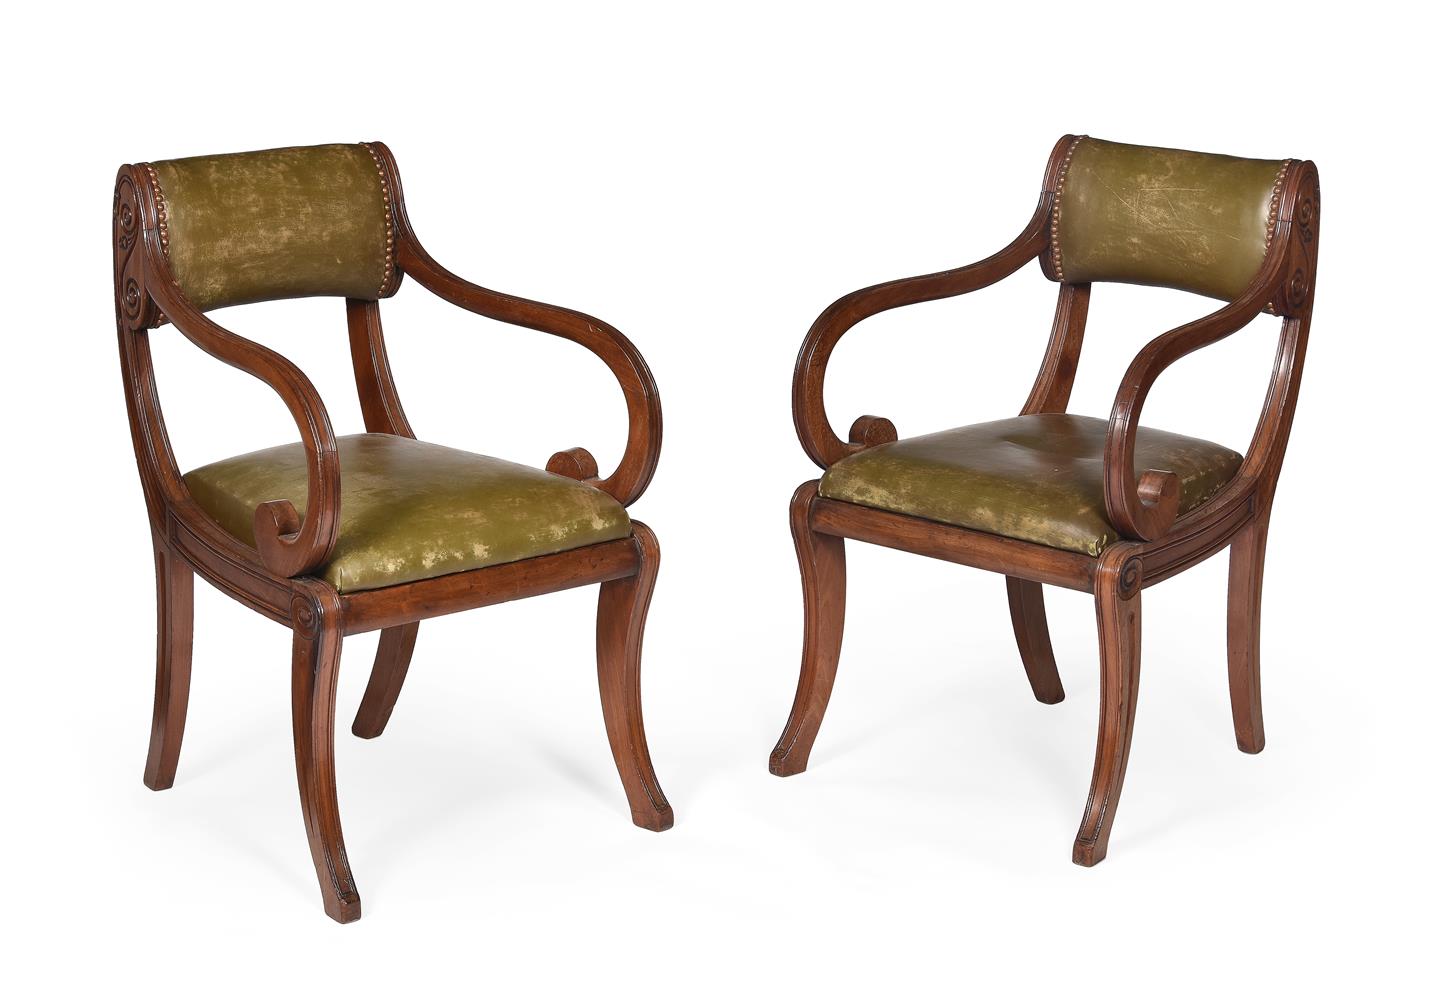 A PAIR OR REGENCY MAHOGANY AND LEATHER UPHOLSTERED OPEN ARMCHAIRS, POSSIBLY SCOTTISH, CIRCA 1820 - Image 2 of 4